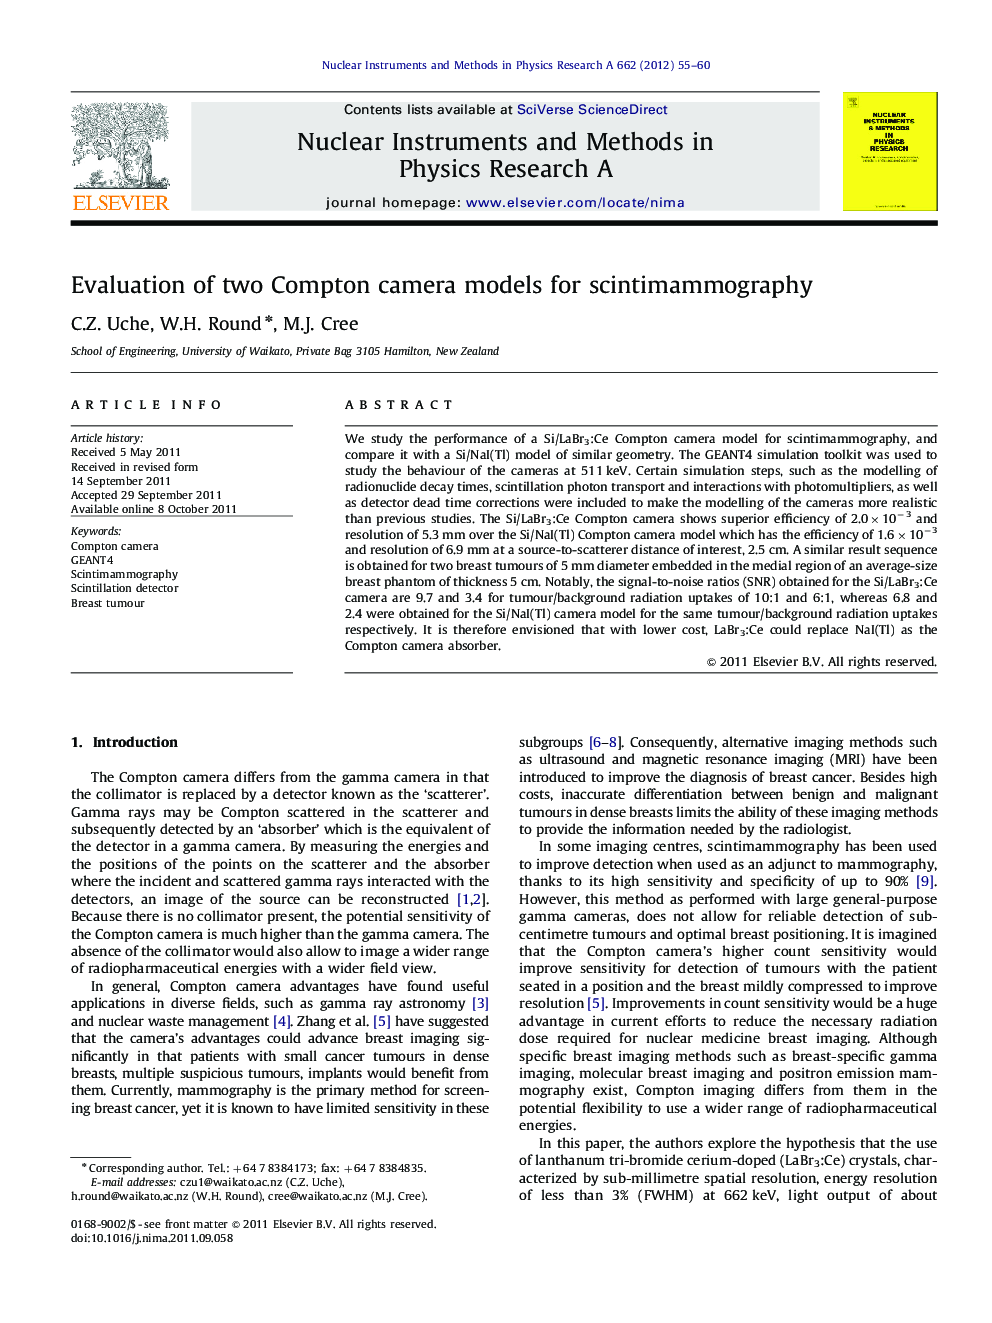 Evaluation of two Compton camera models for scintimammography